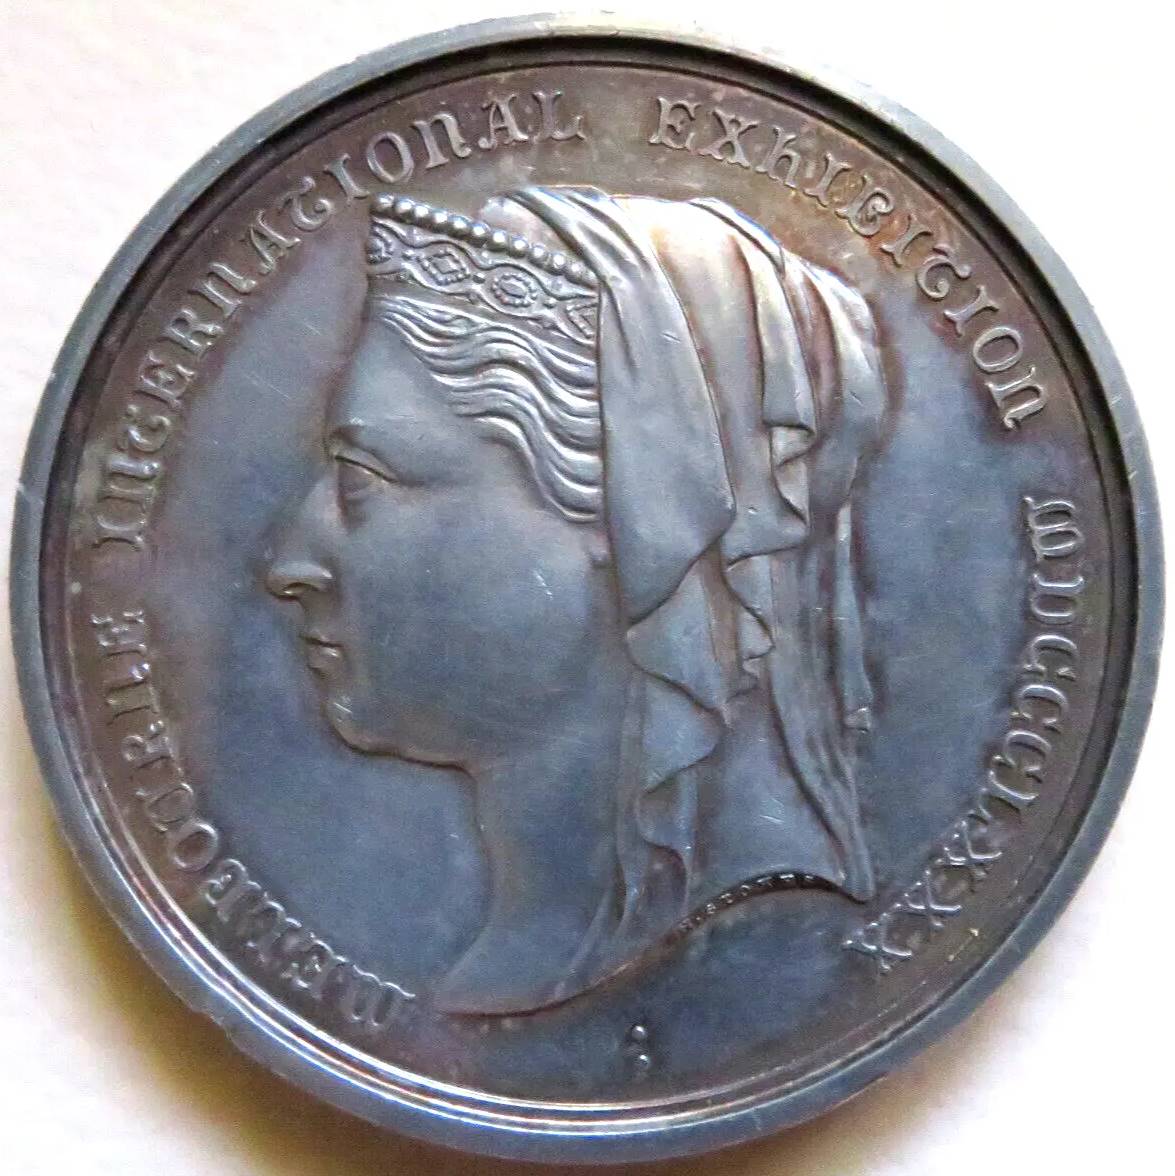 Medals of the 1880 Melbourne International Exhibition | Historical Collection